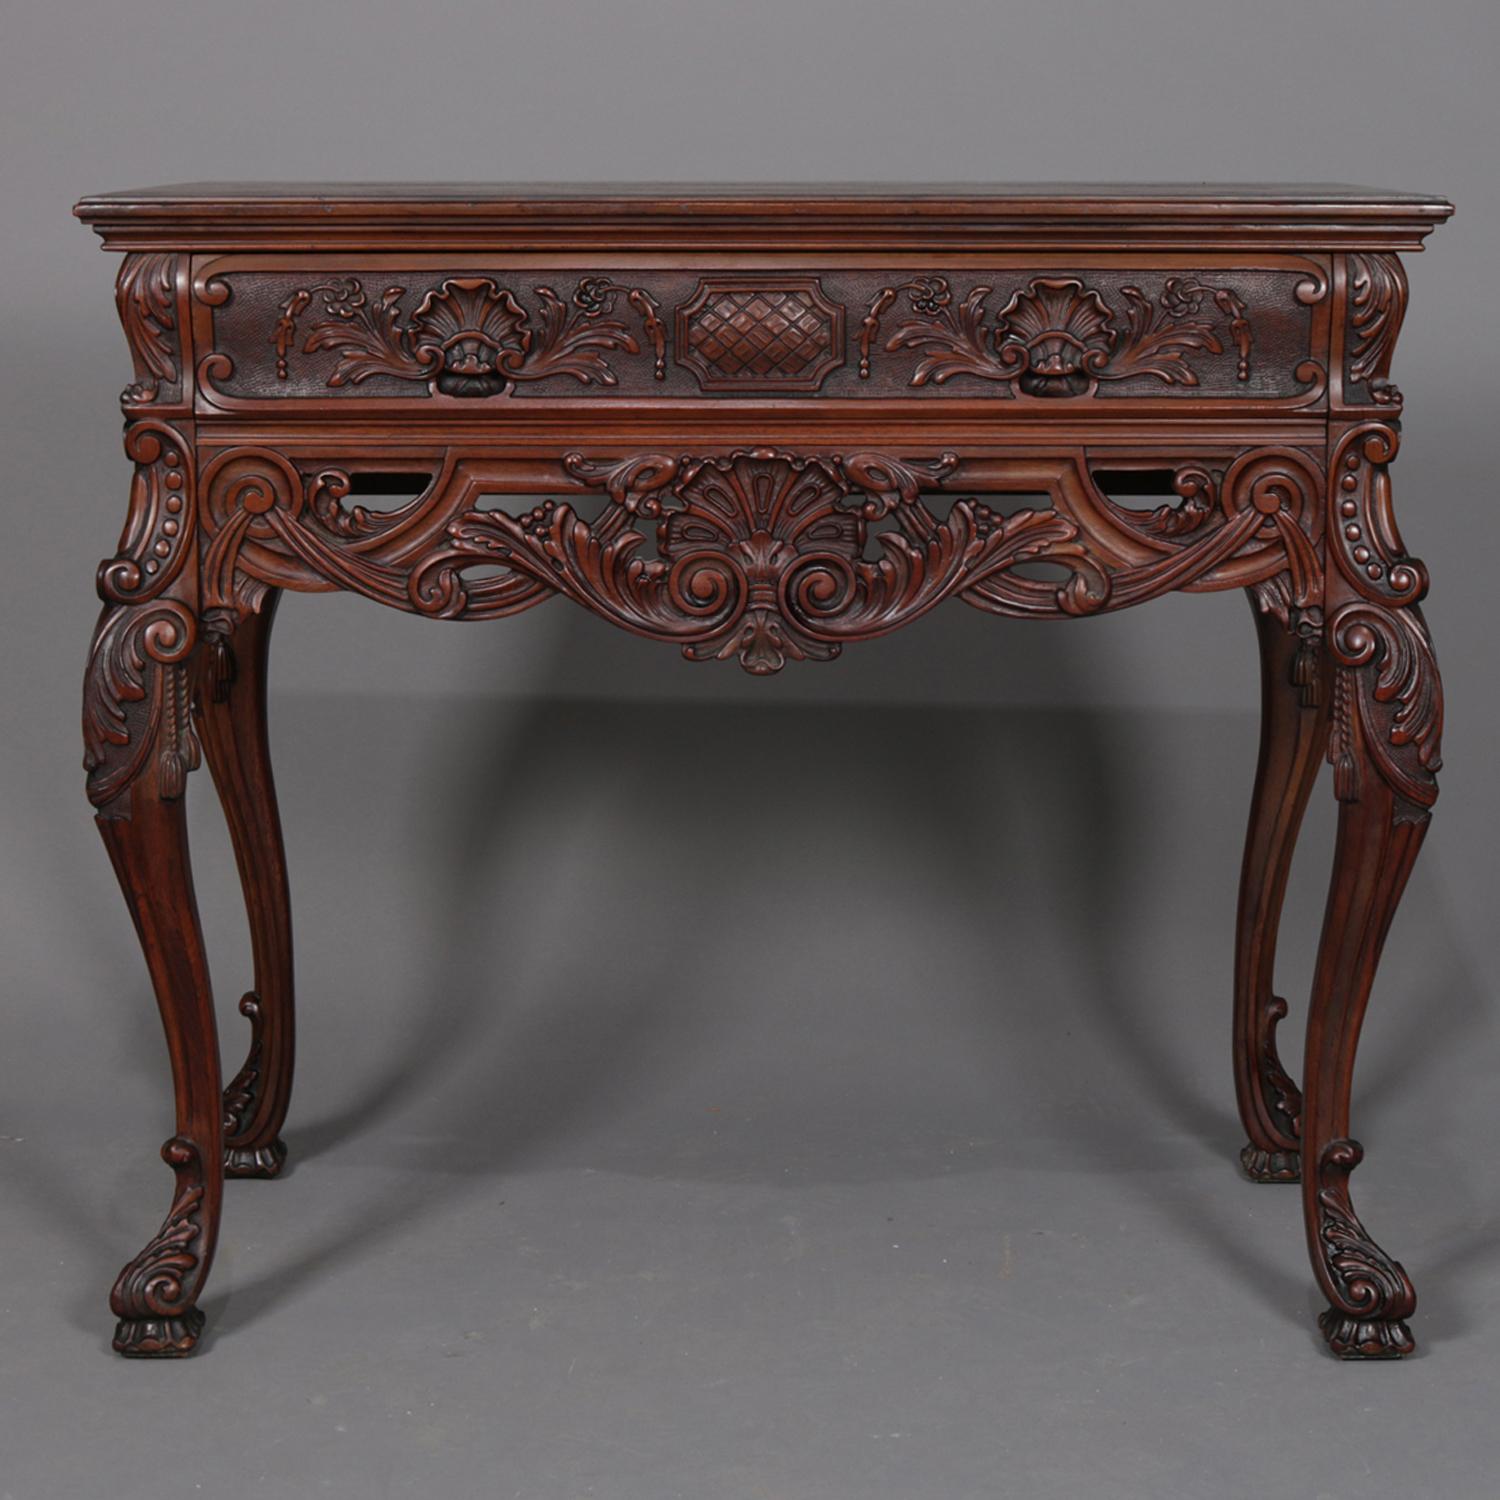 Antique French petite server features walnut construction with single frieze drawer having carved shell and foliate decoration and over pierced apron having shell with flanking scroll and foliate carving, raised on cabriole legs with acanthus knees